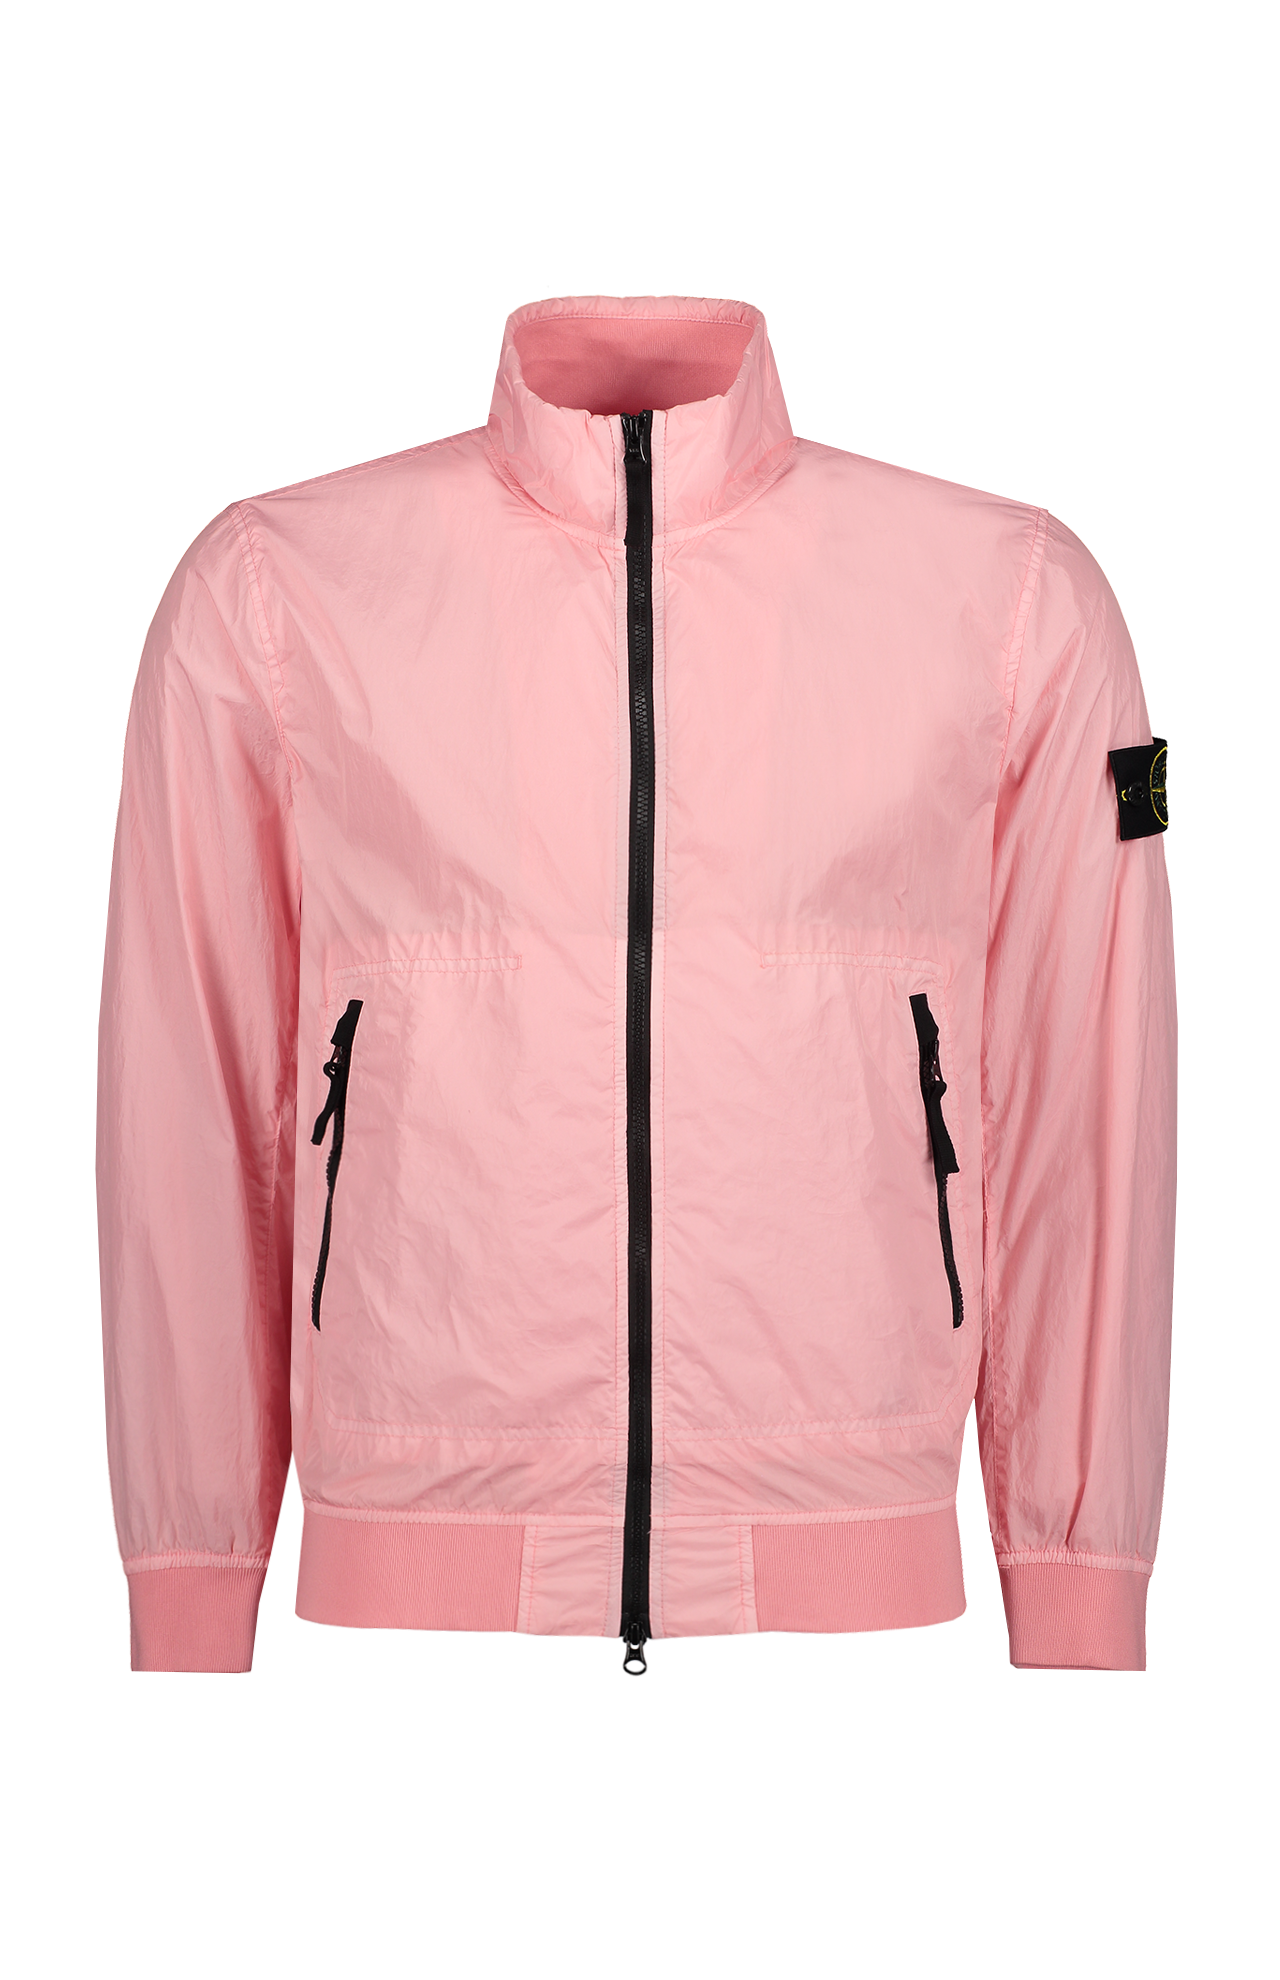 Stone Island Jacket with Black Hardware in Pink, Mannequin Image (7054254014579)